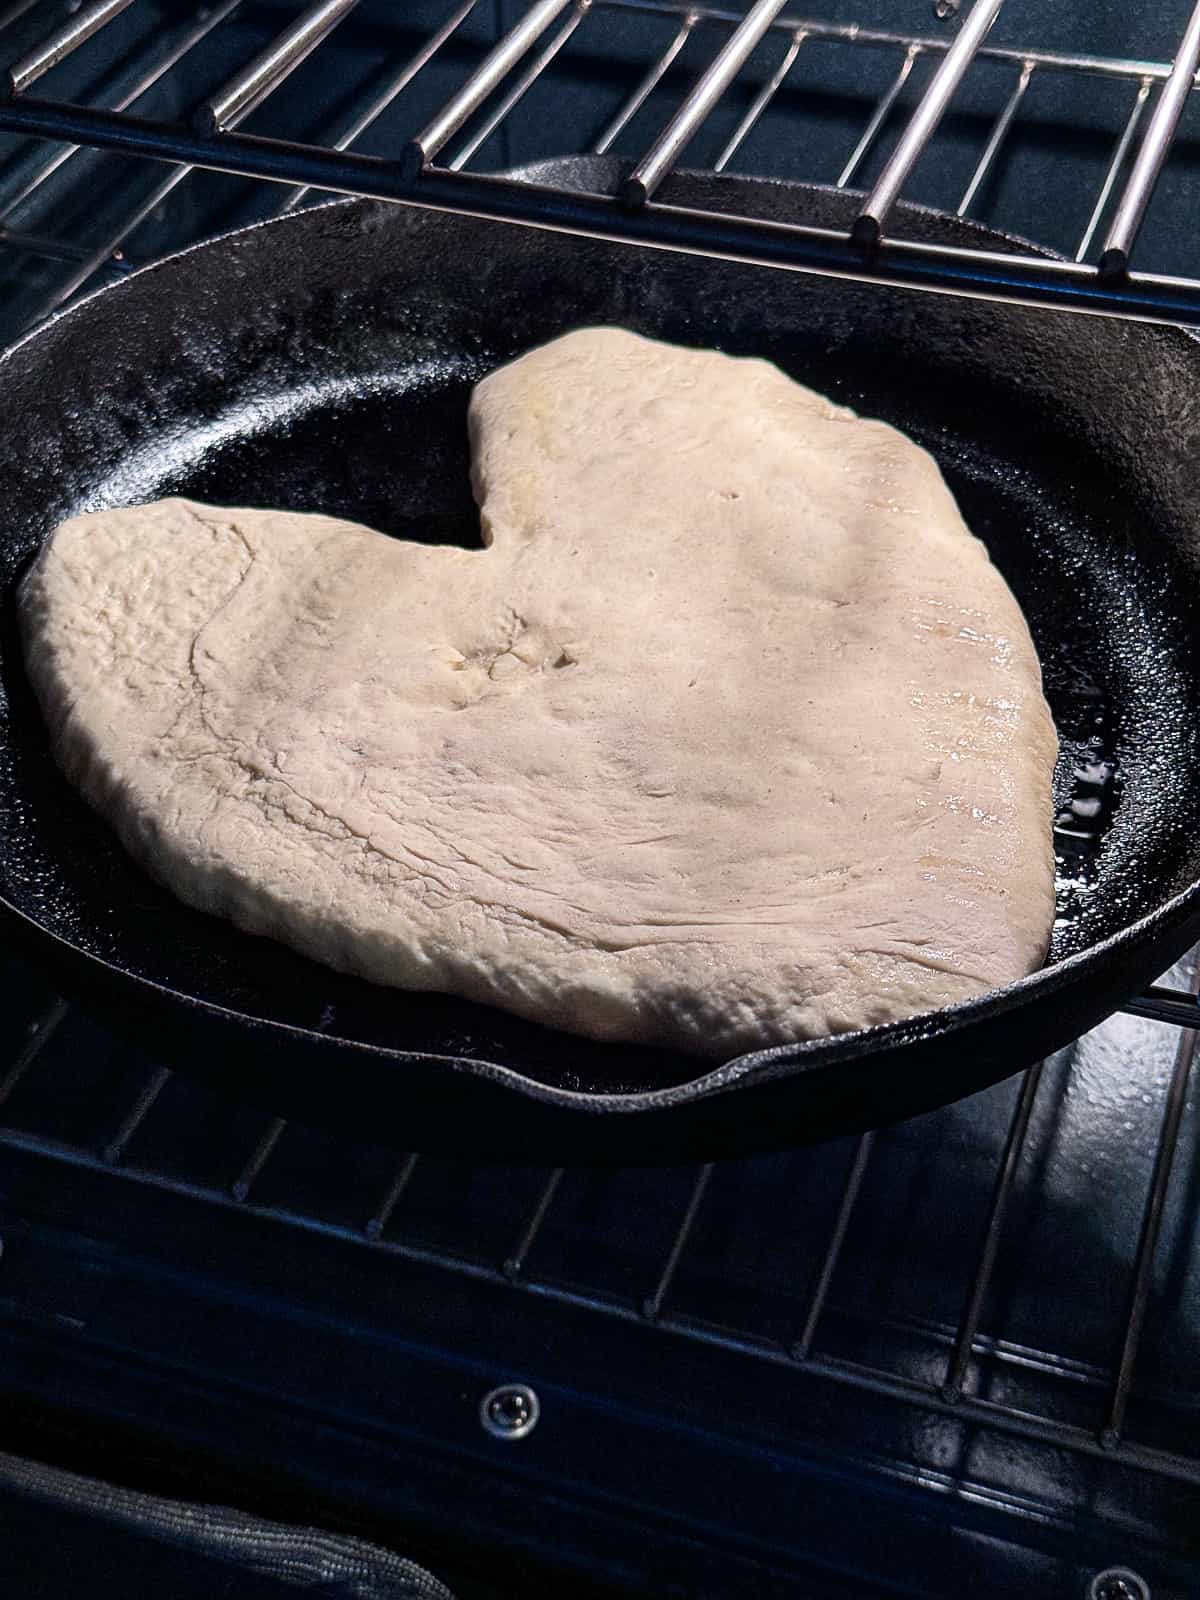 Par Baking Heart Shaped Pizza in the oven